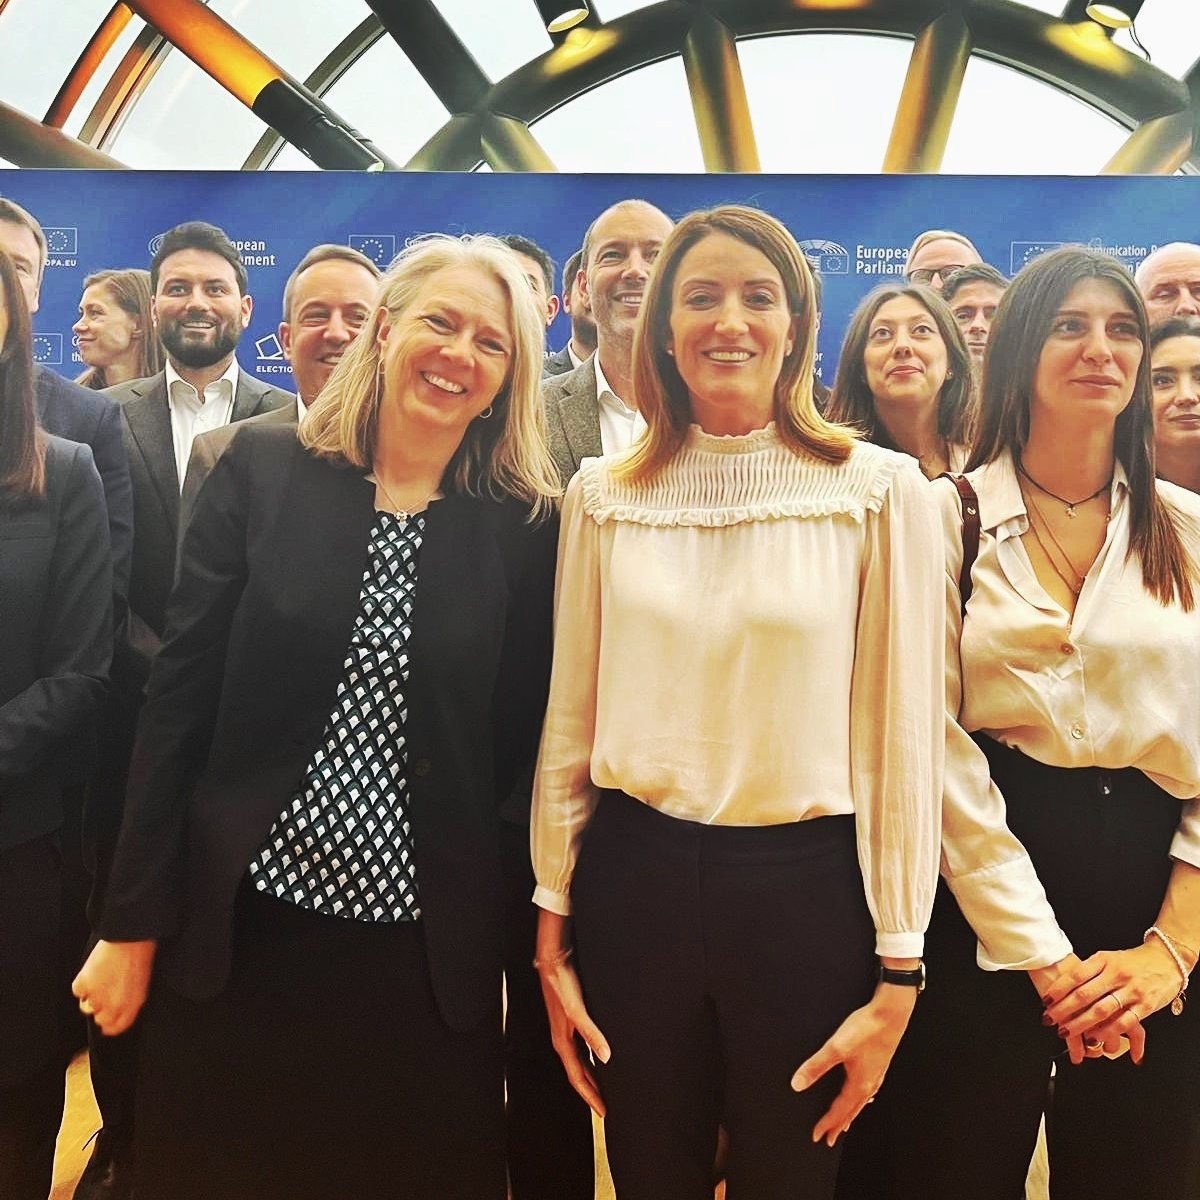 .@ETNOAssociation supports the #UseYourVote institutional campaign to promote participation at the EU Elections next June. Yesterday we joined the @Europarl_EN Partnership Agreement Reception. We must all take action to support democracy. 📸Our DG @LiseFuhr with @EP_President 👇